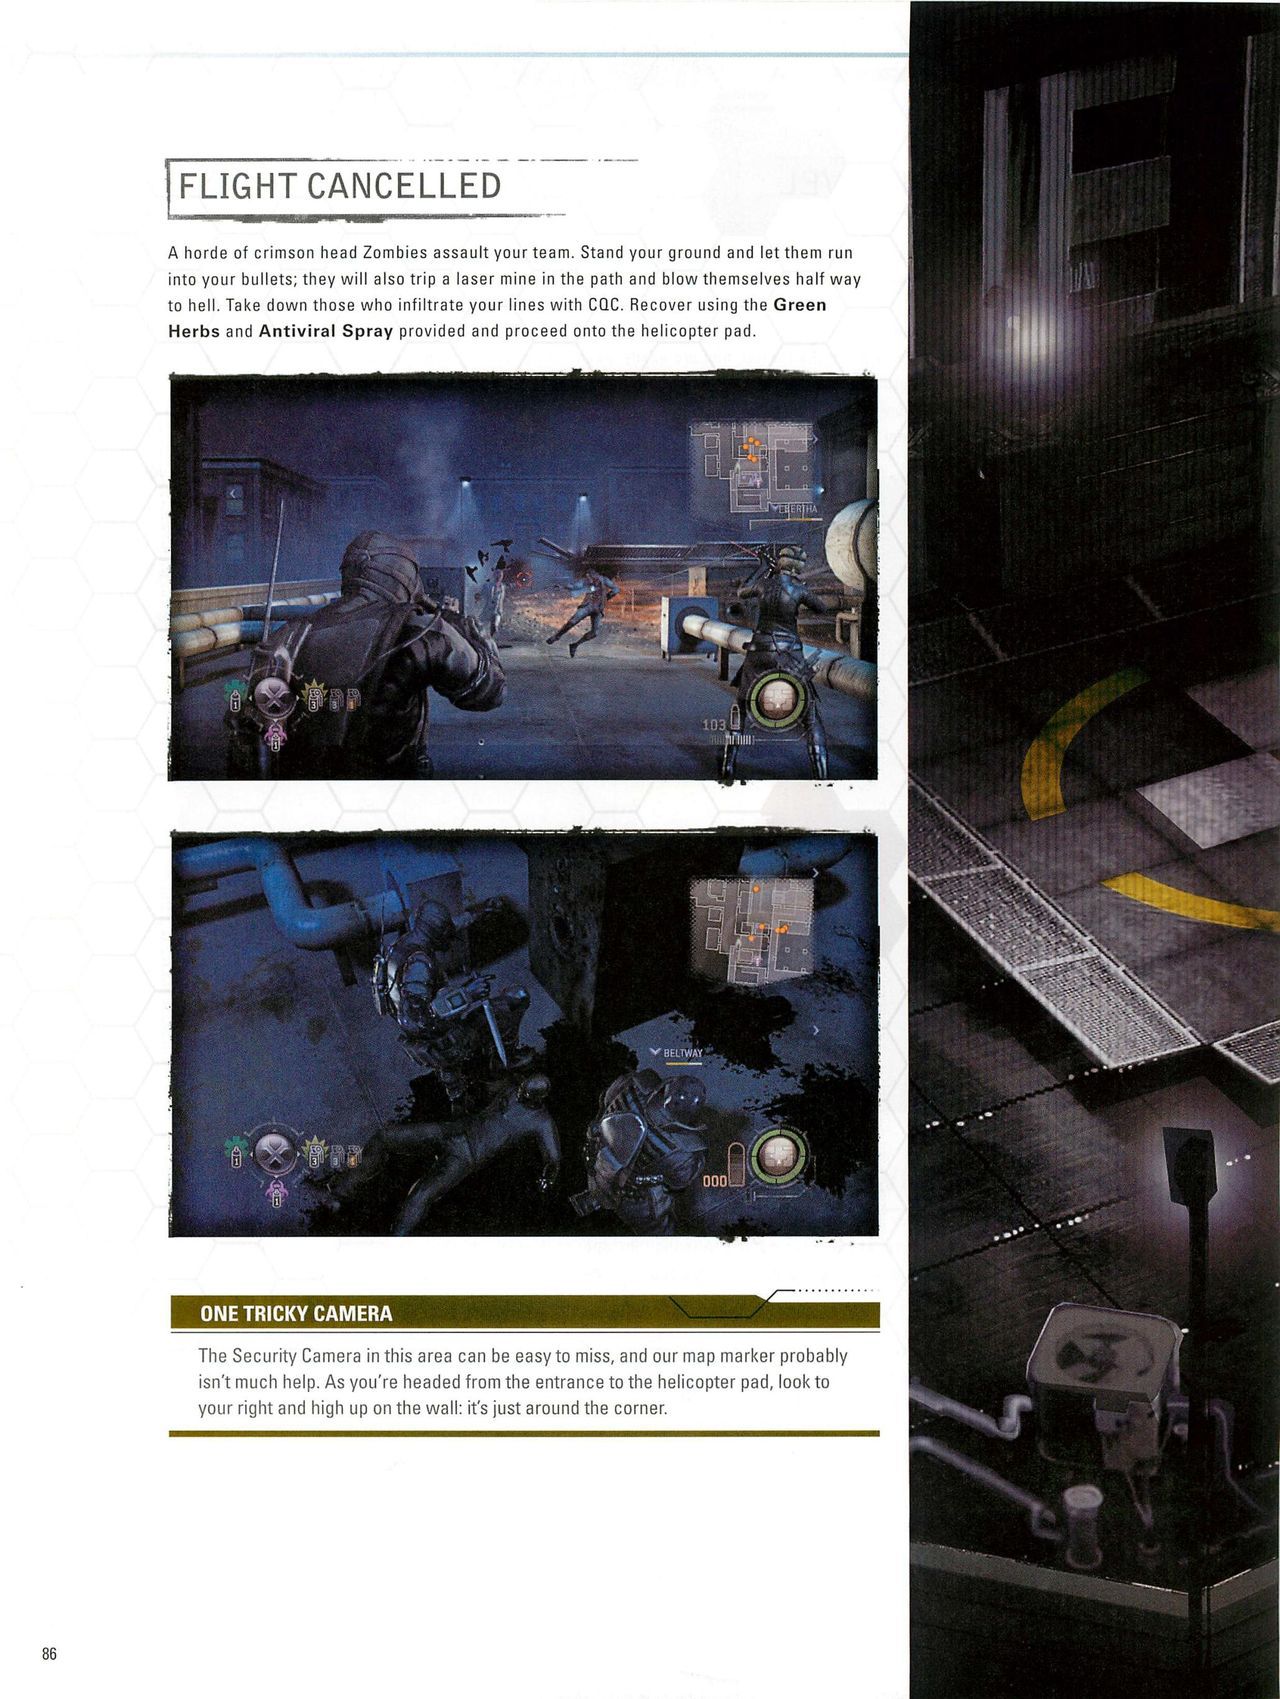 Resident Evil: Operation Raccoon City Official Strategy Guide (watermarked) 88